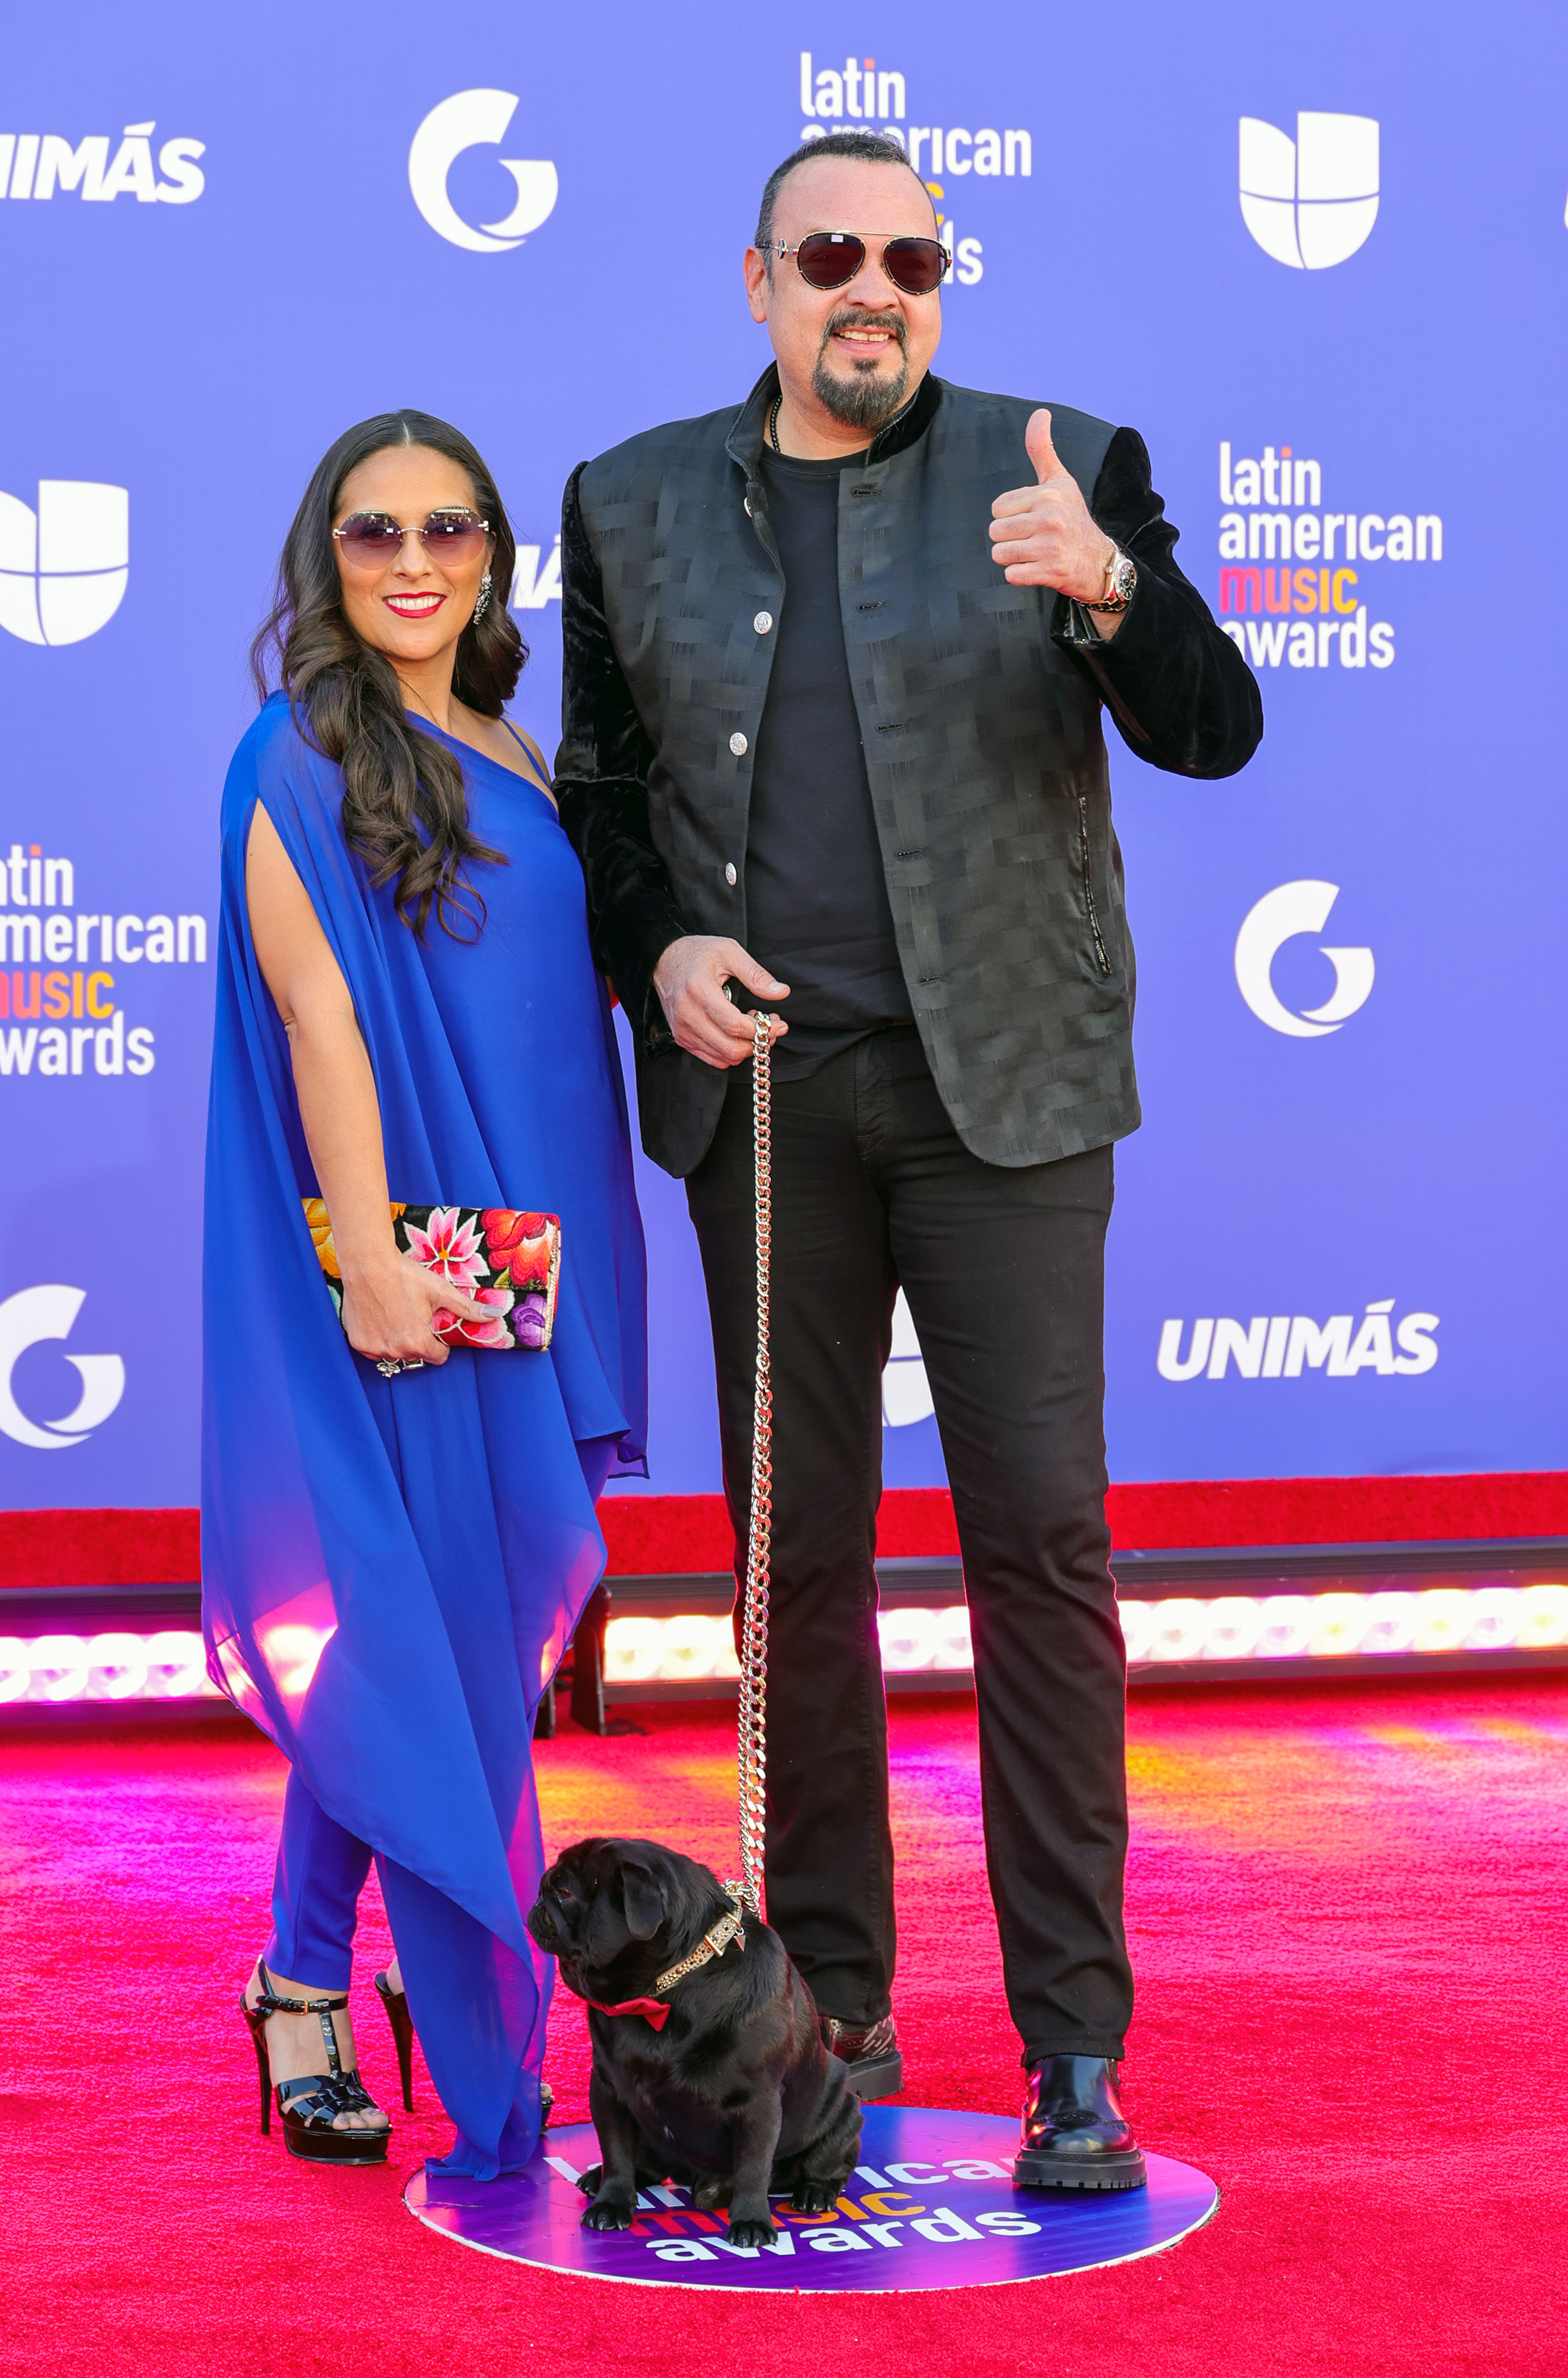 Aneliz Álvarez Alcalá and Pepe Aguilar attend the 2023 Latin American Music Awards with their dog, Gordo, at MGM Grand Garden Arena on April 20, 2023, in Las Vegas, Nevada. | Source: Getty Images